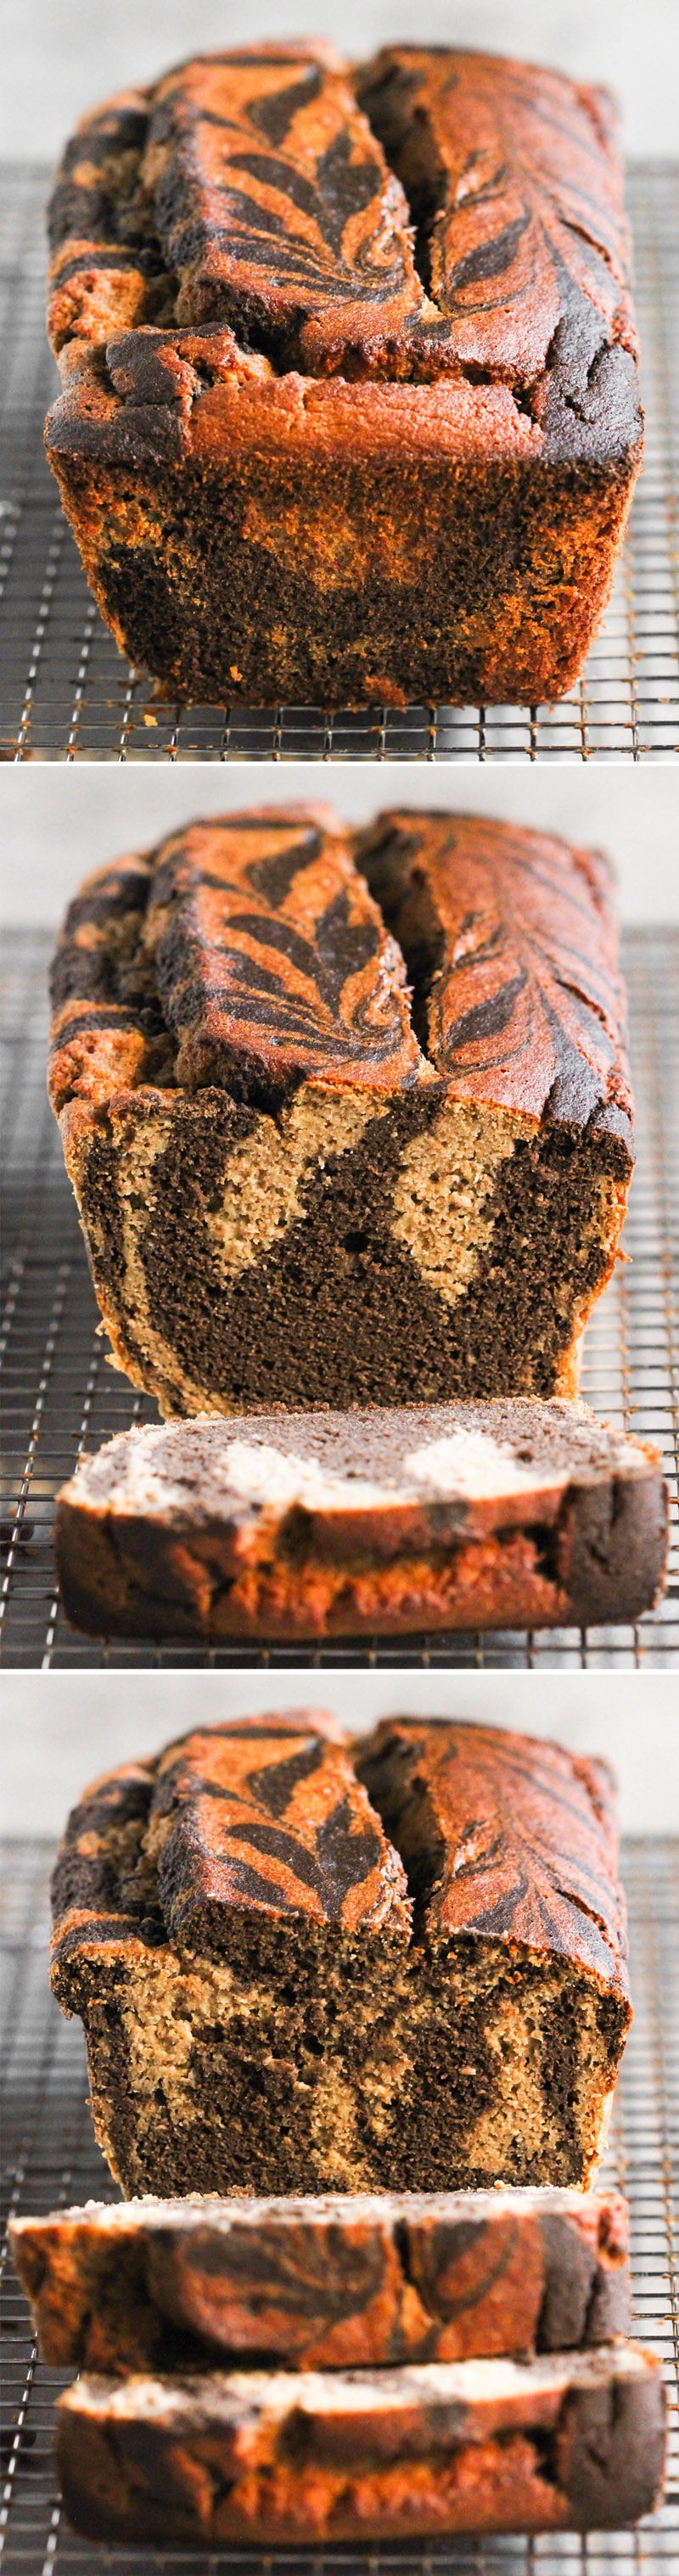 (How to make Marble Bread) This Marbled Chocolate Banana Bread is so moist, fluffy, springy, and sweet! It doesn't taste healthy, sugar free, gluten free, dairy free, high protein, or whole grain ONE BIT. It tastes like it's from a bakery!